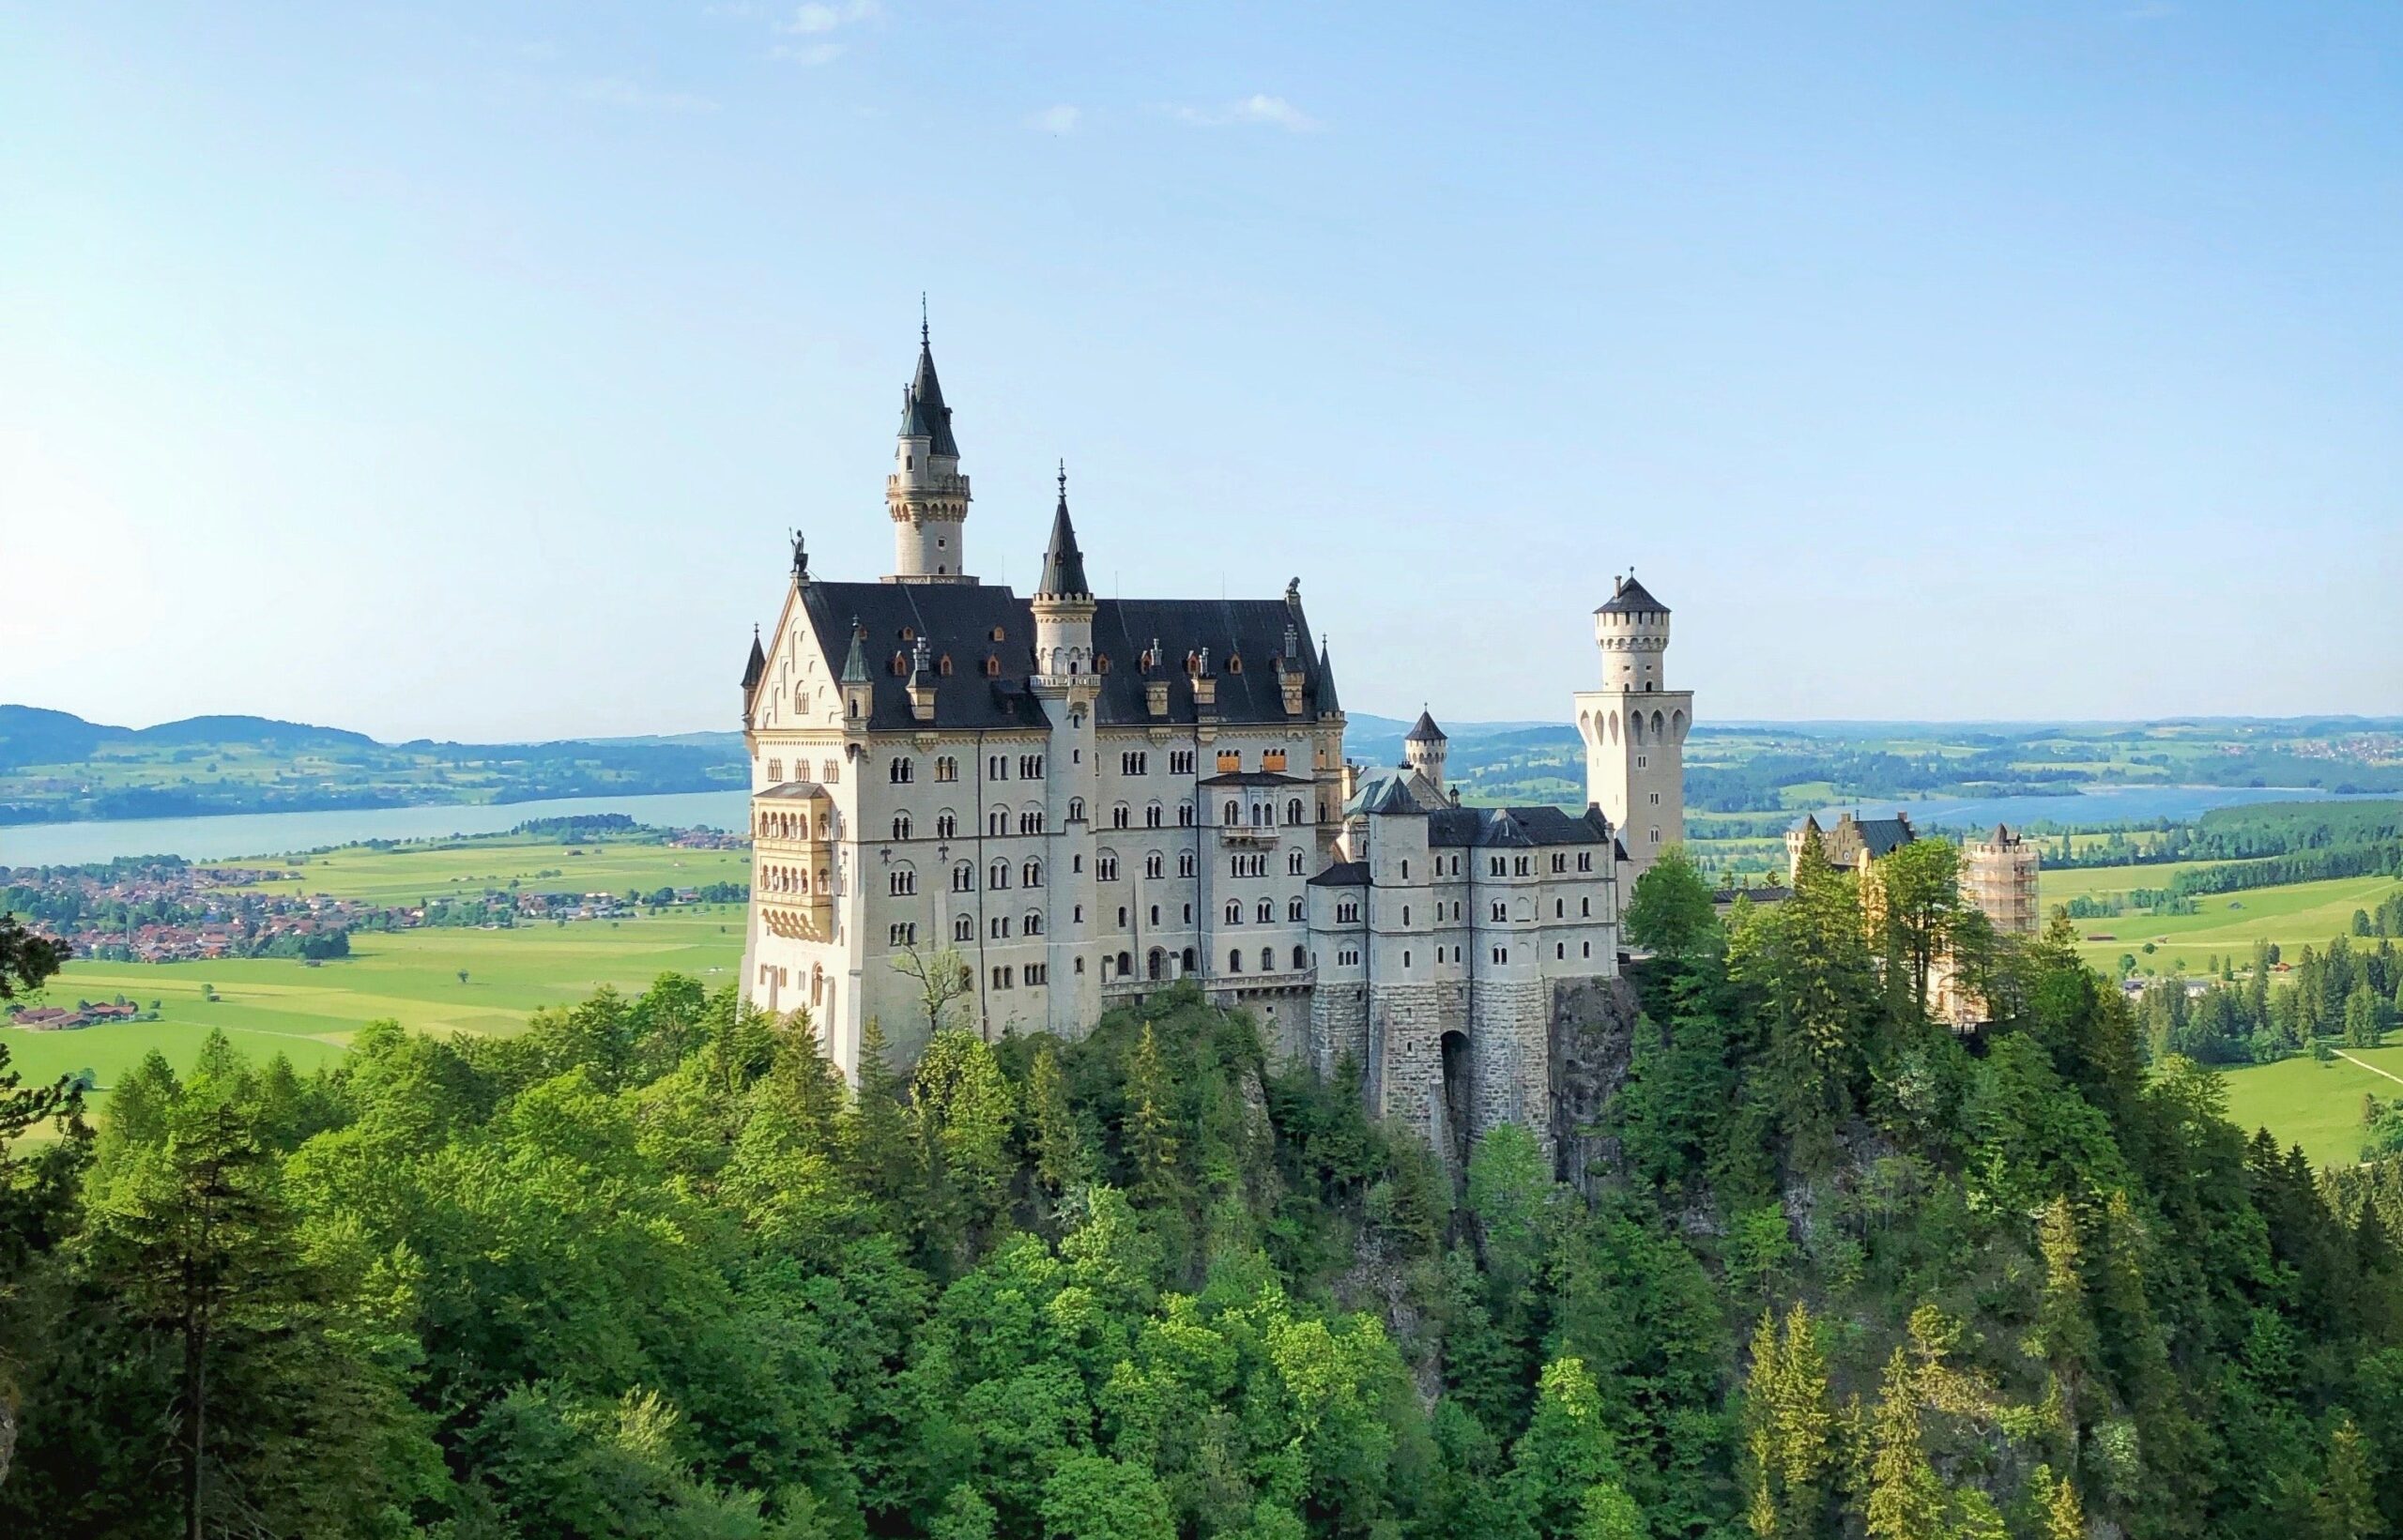 The Ultimate Group Travel Destinations in Germany